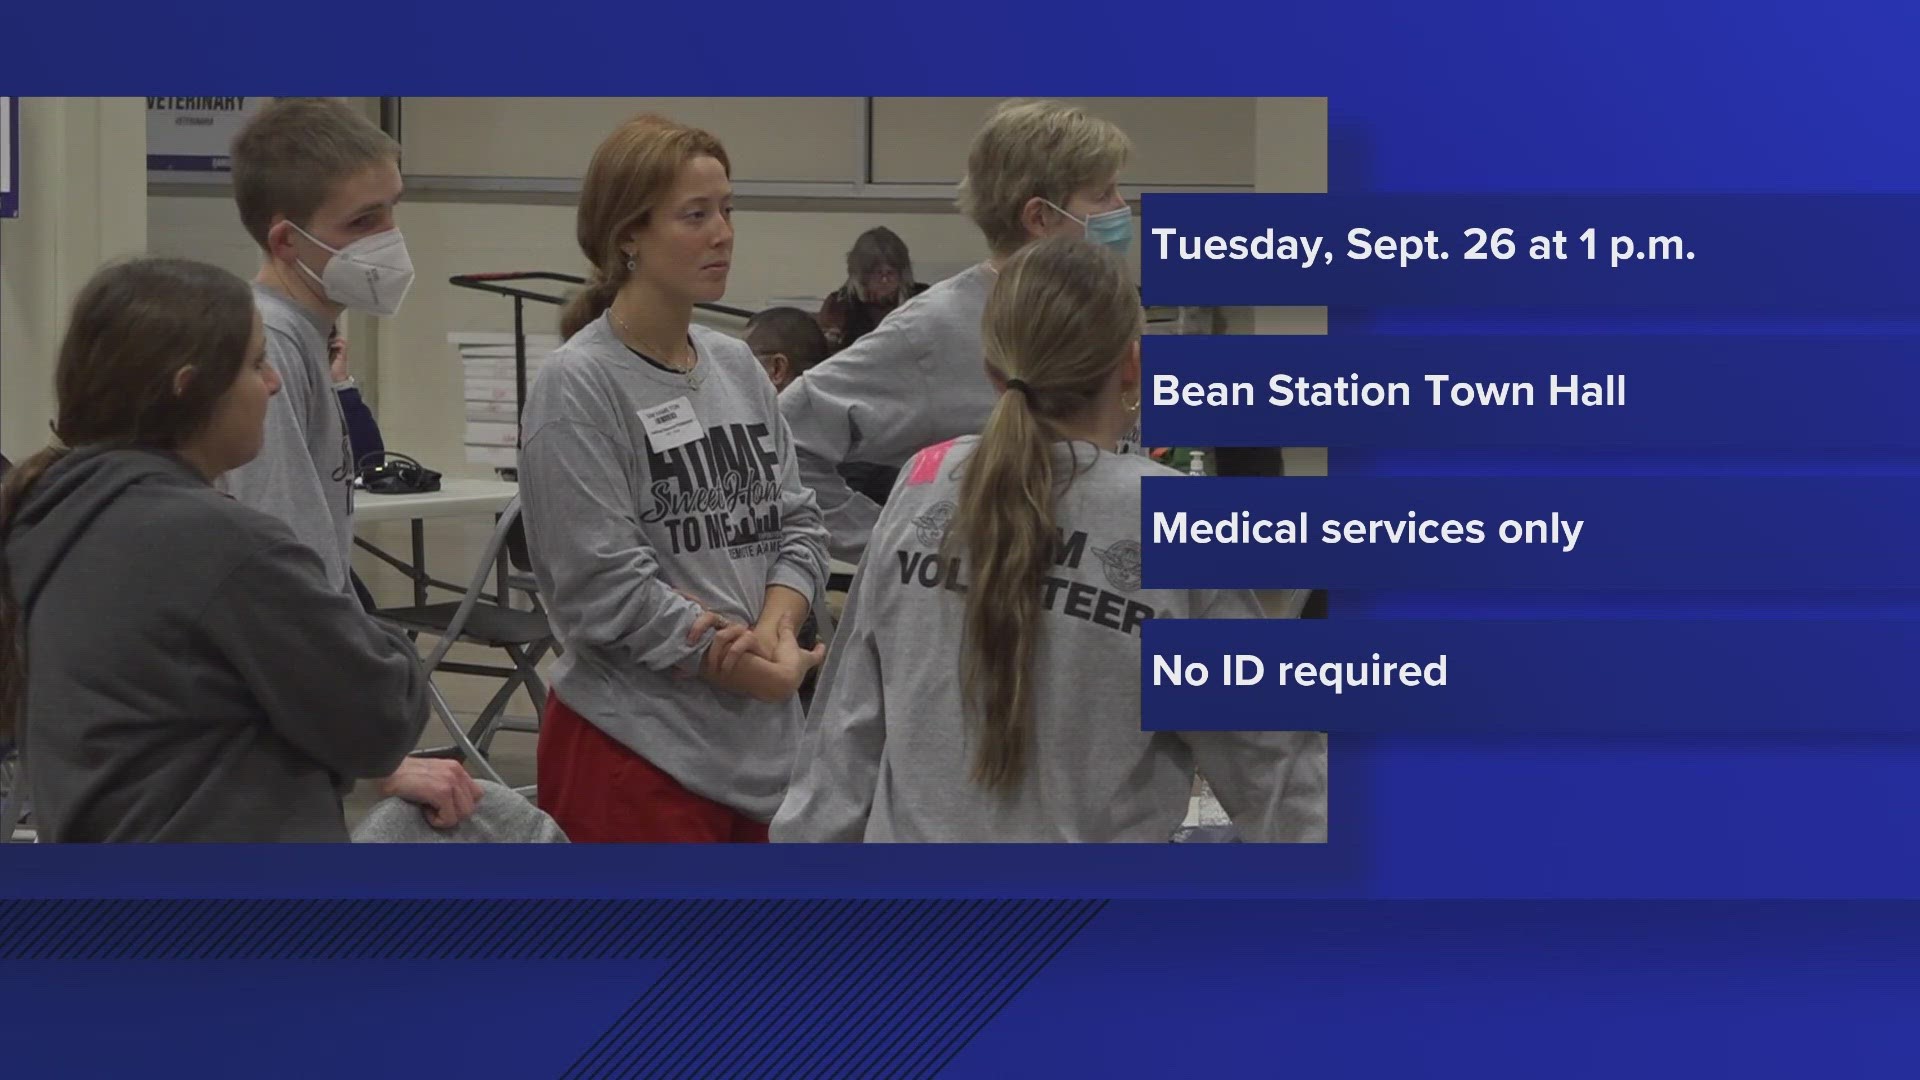 The free telehealth mobile clinic will give medical services aboard RAM's Telehealth Truck at Bean Station Town Hall.